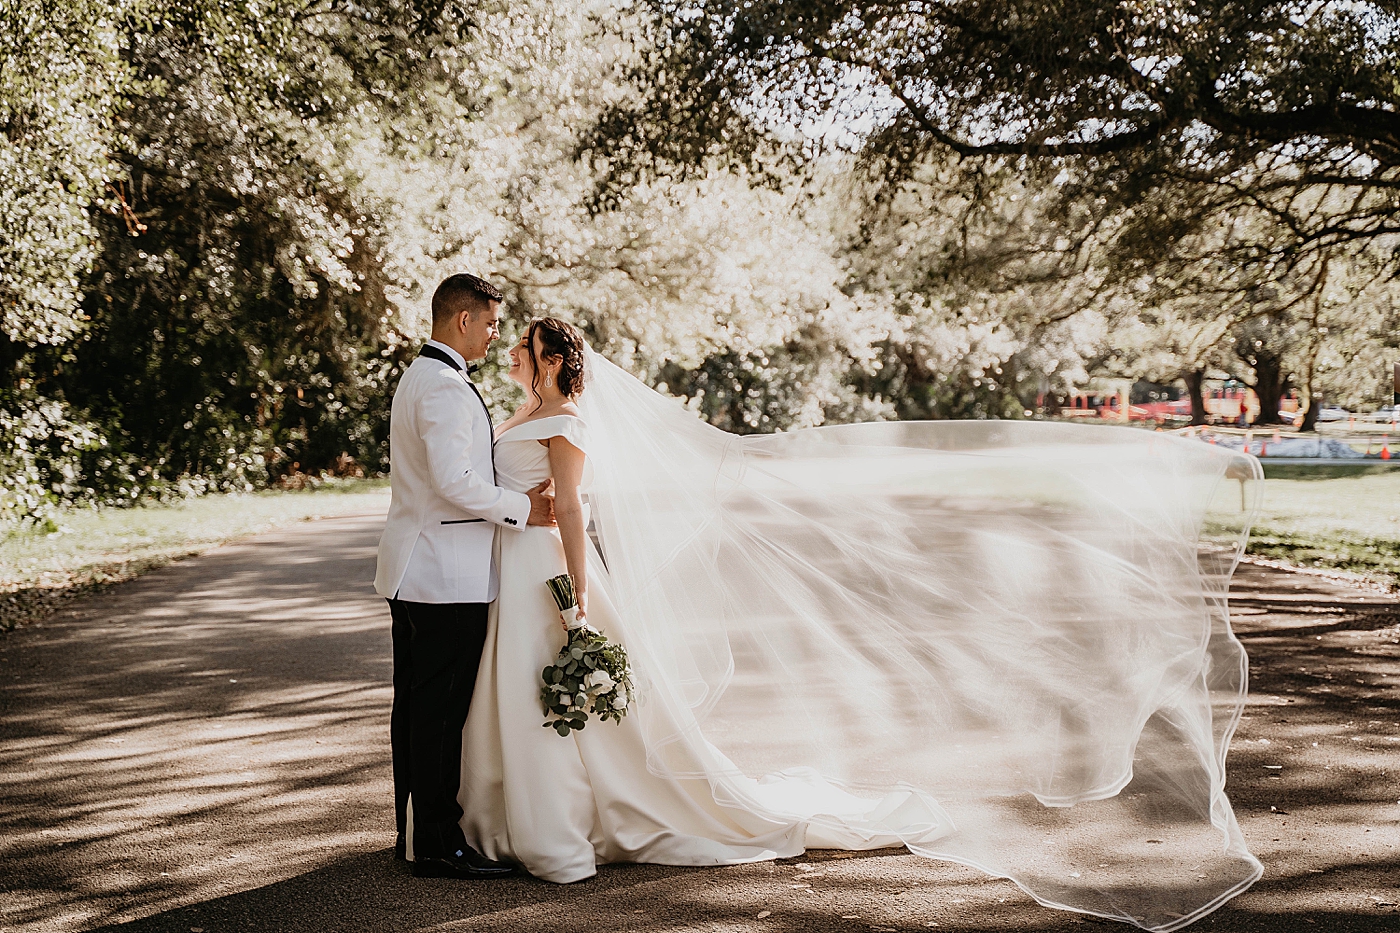 Bride and Groom holding each other with flowing veil Lavan Venue Wedding Photography captured by South Florida Wedding Photographer Krystal Capone Photography